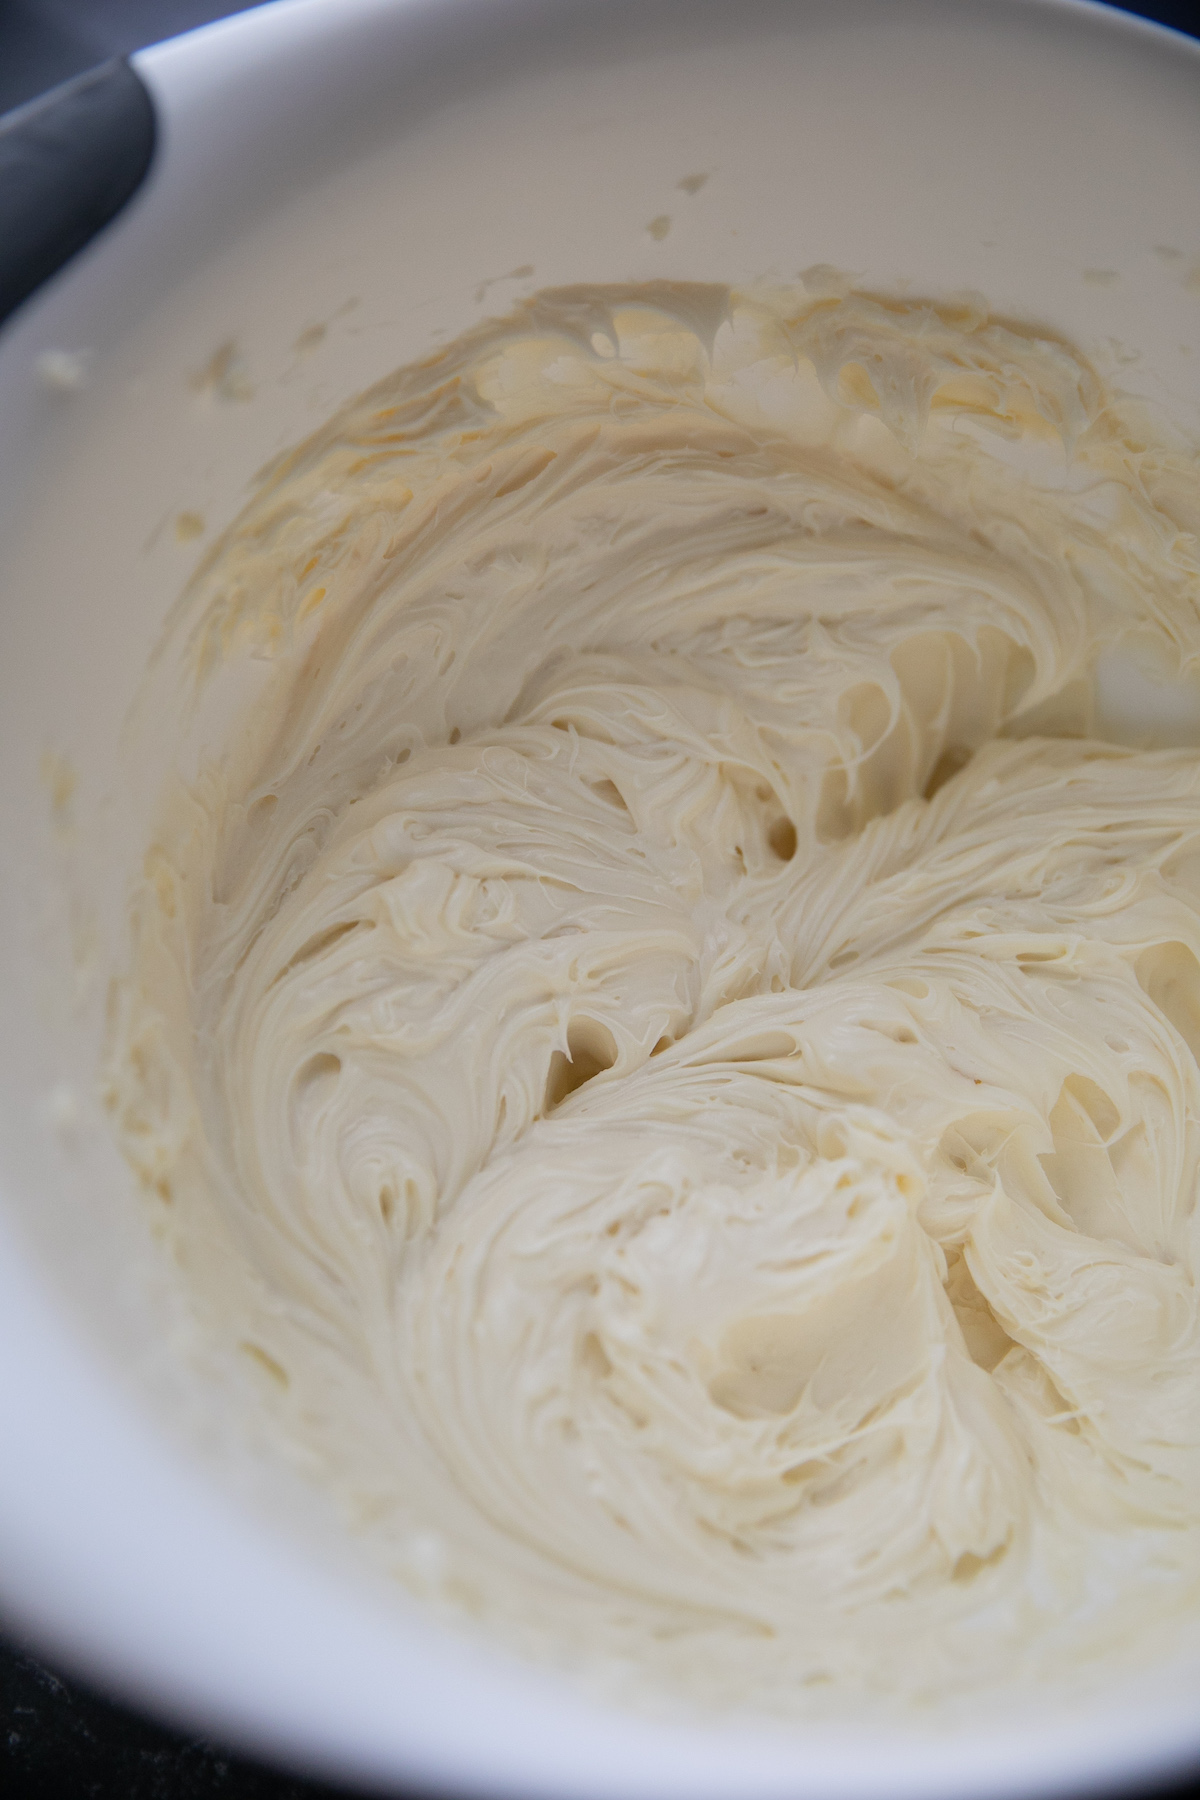 cream cheese filling in a bowl